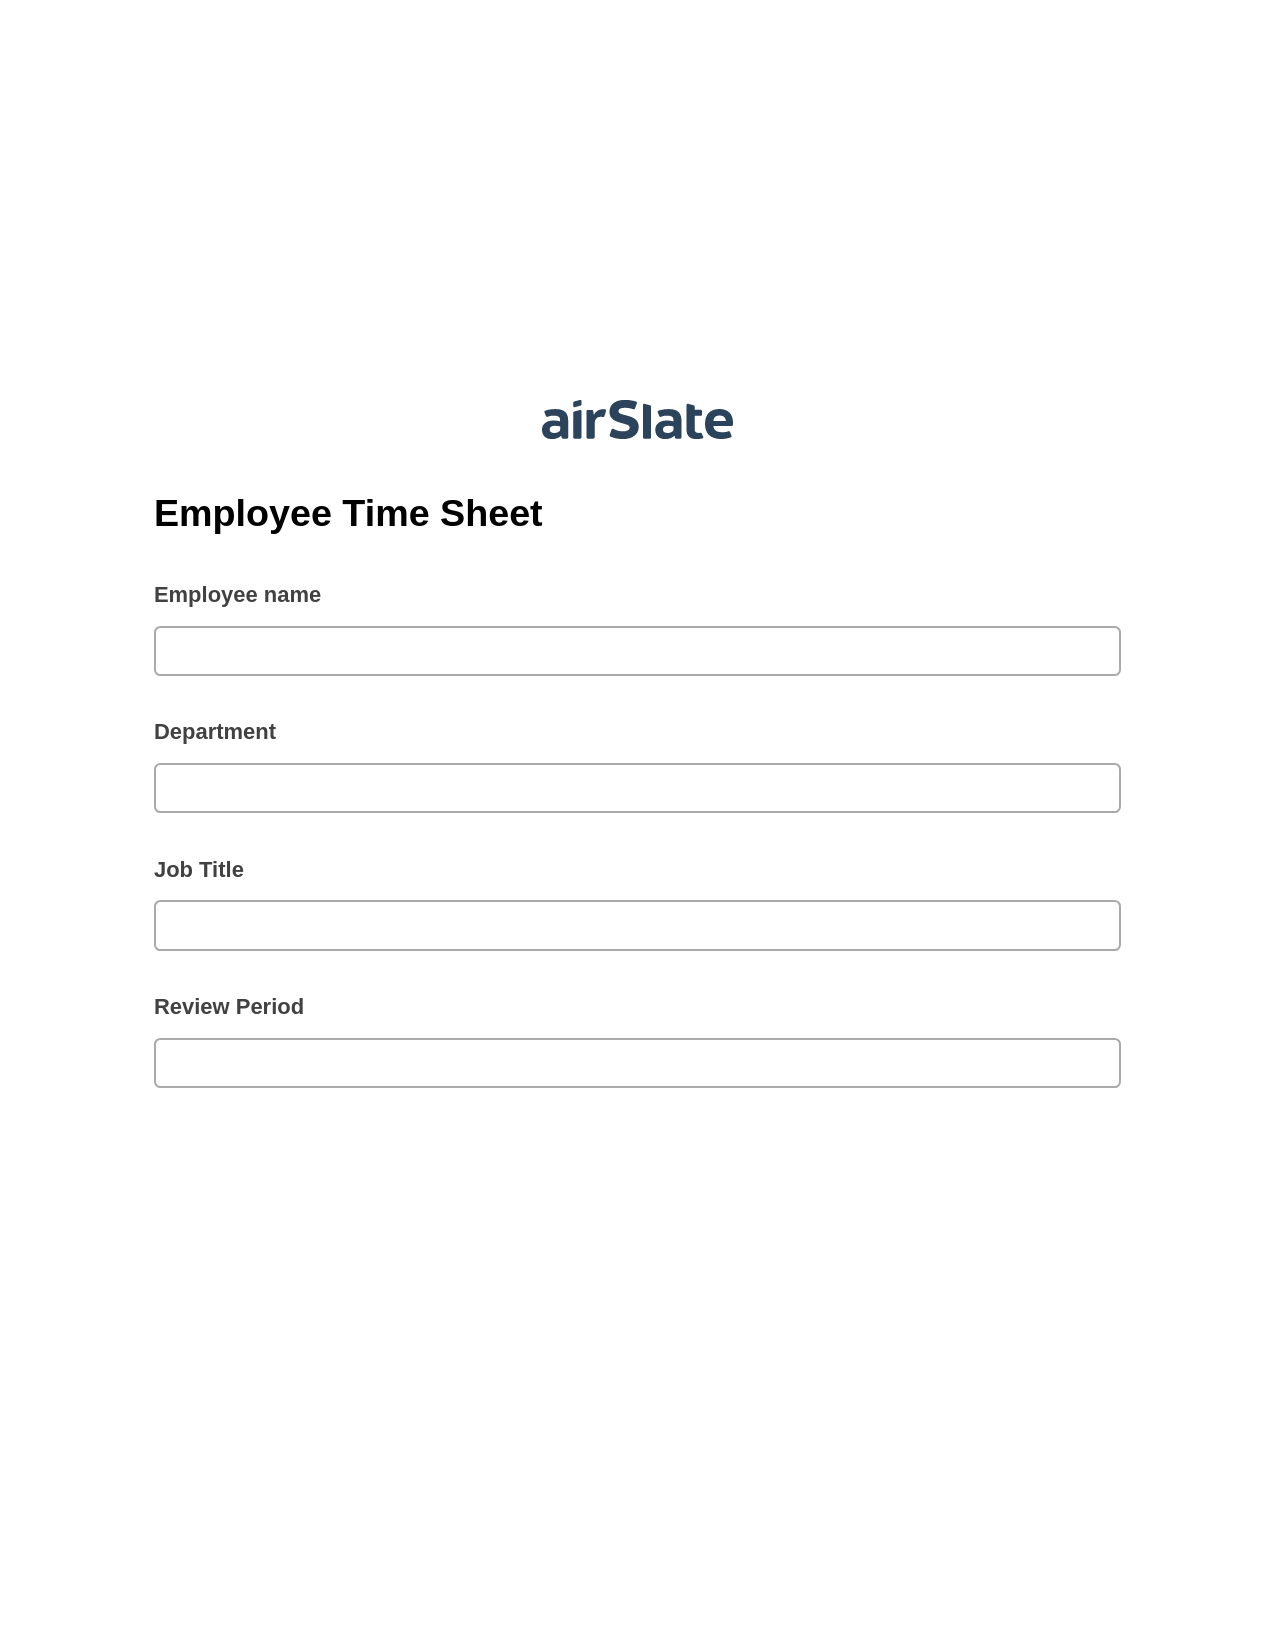 Employee Time Sheet Pre-fill from Excel Spreadsheet Bot, Create Salesforce Records Bot, Text Message Notification Postfinish Bot